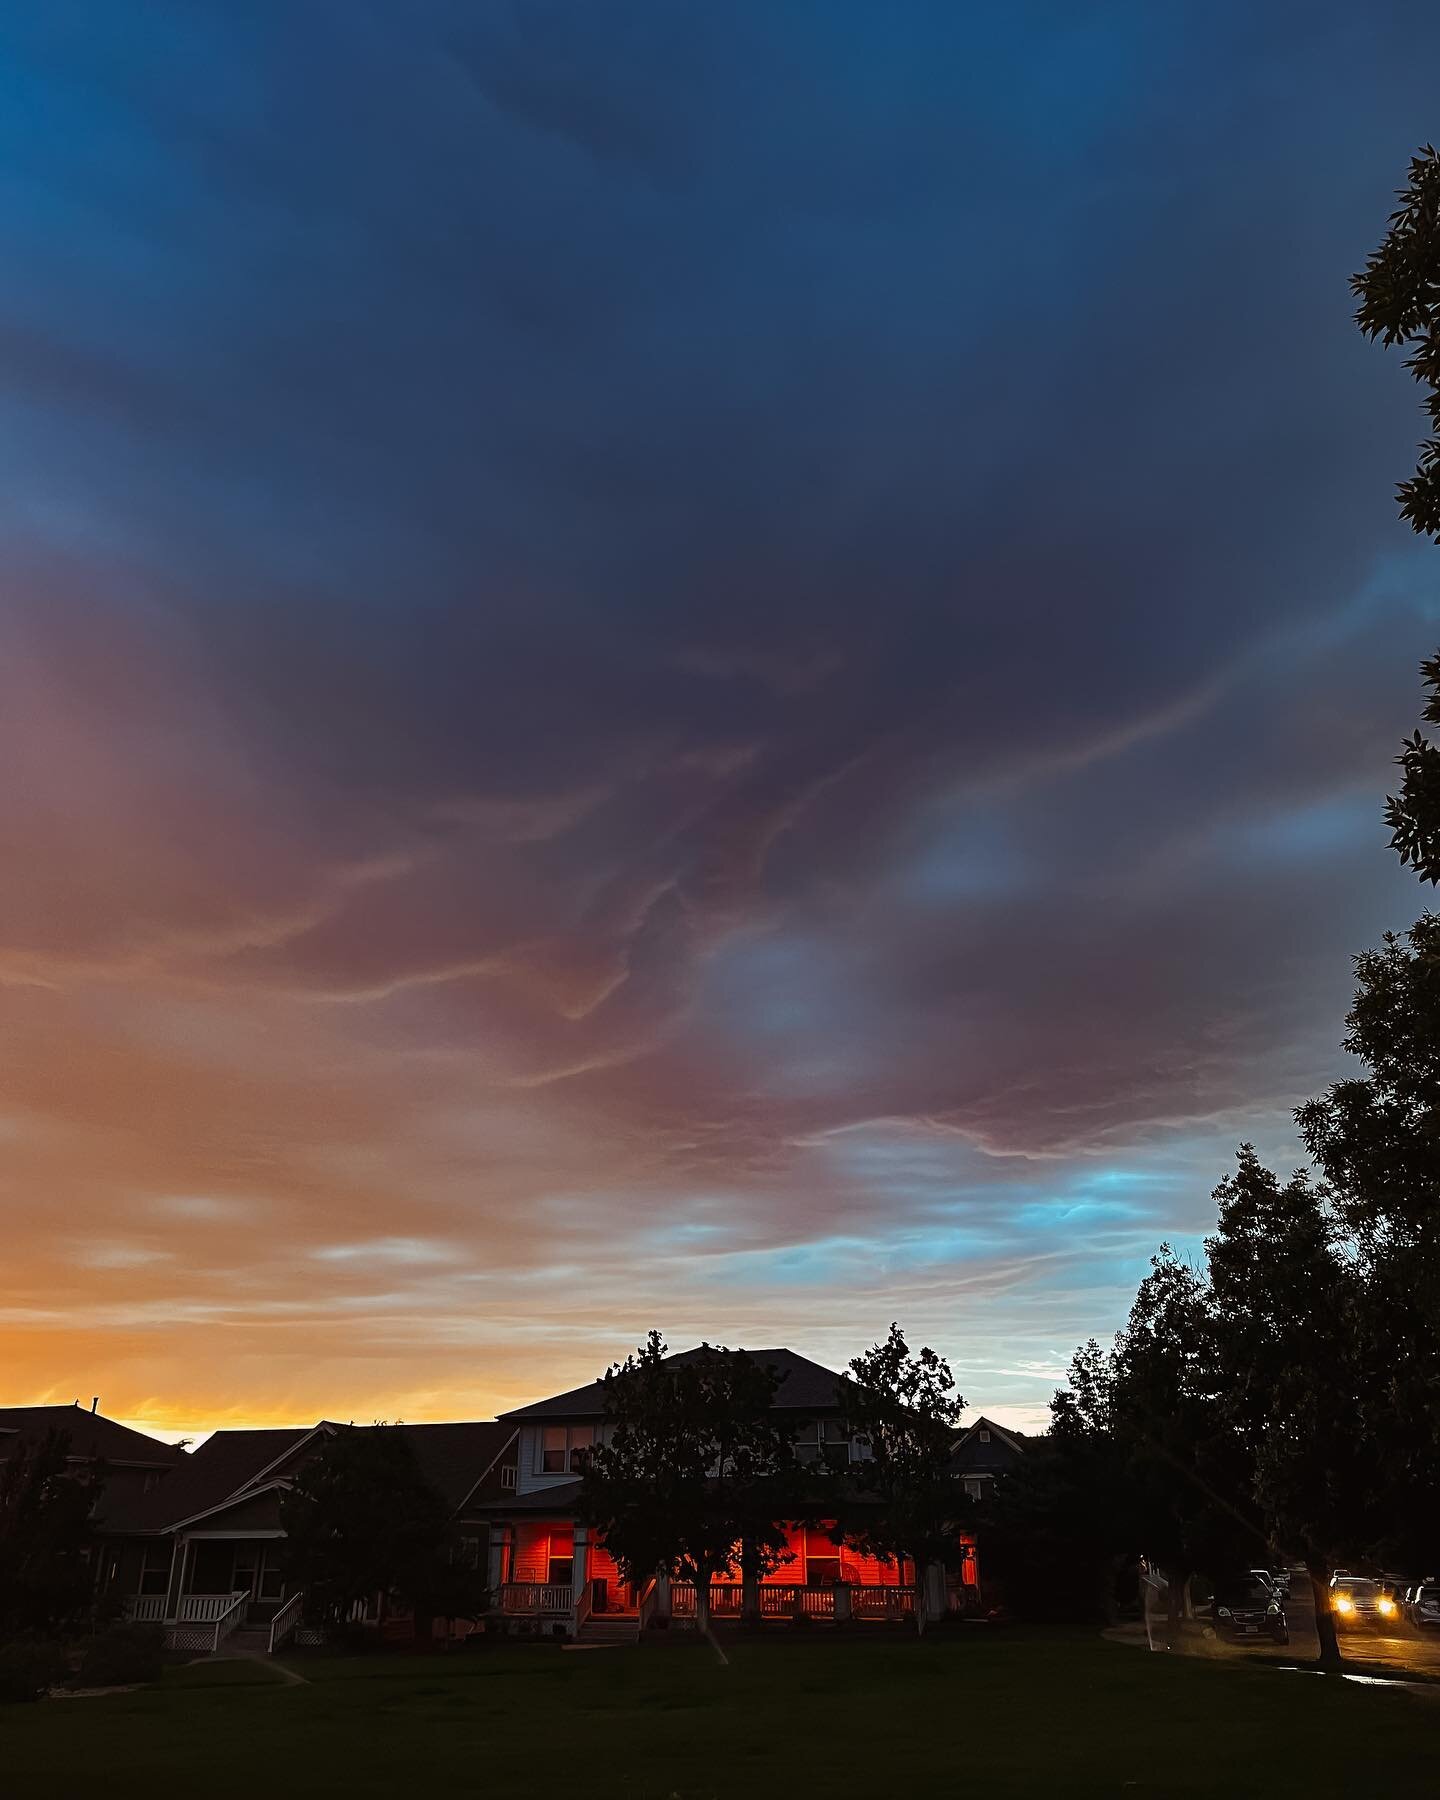 To ring in the 4th. 💥 
&bull;
&bull;
#cloudporn #stormclouds #denvercolorado #sunsets